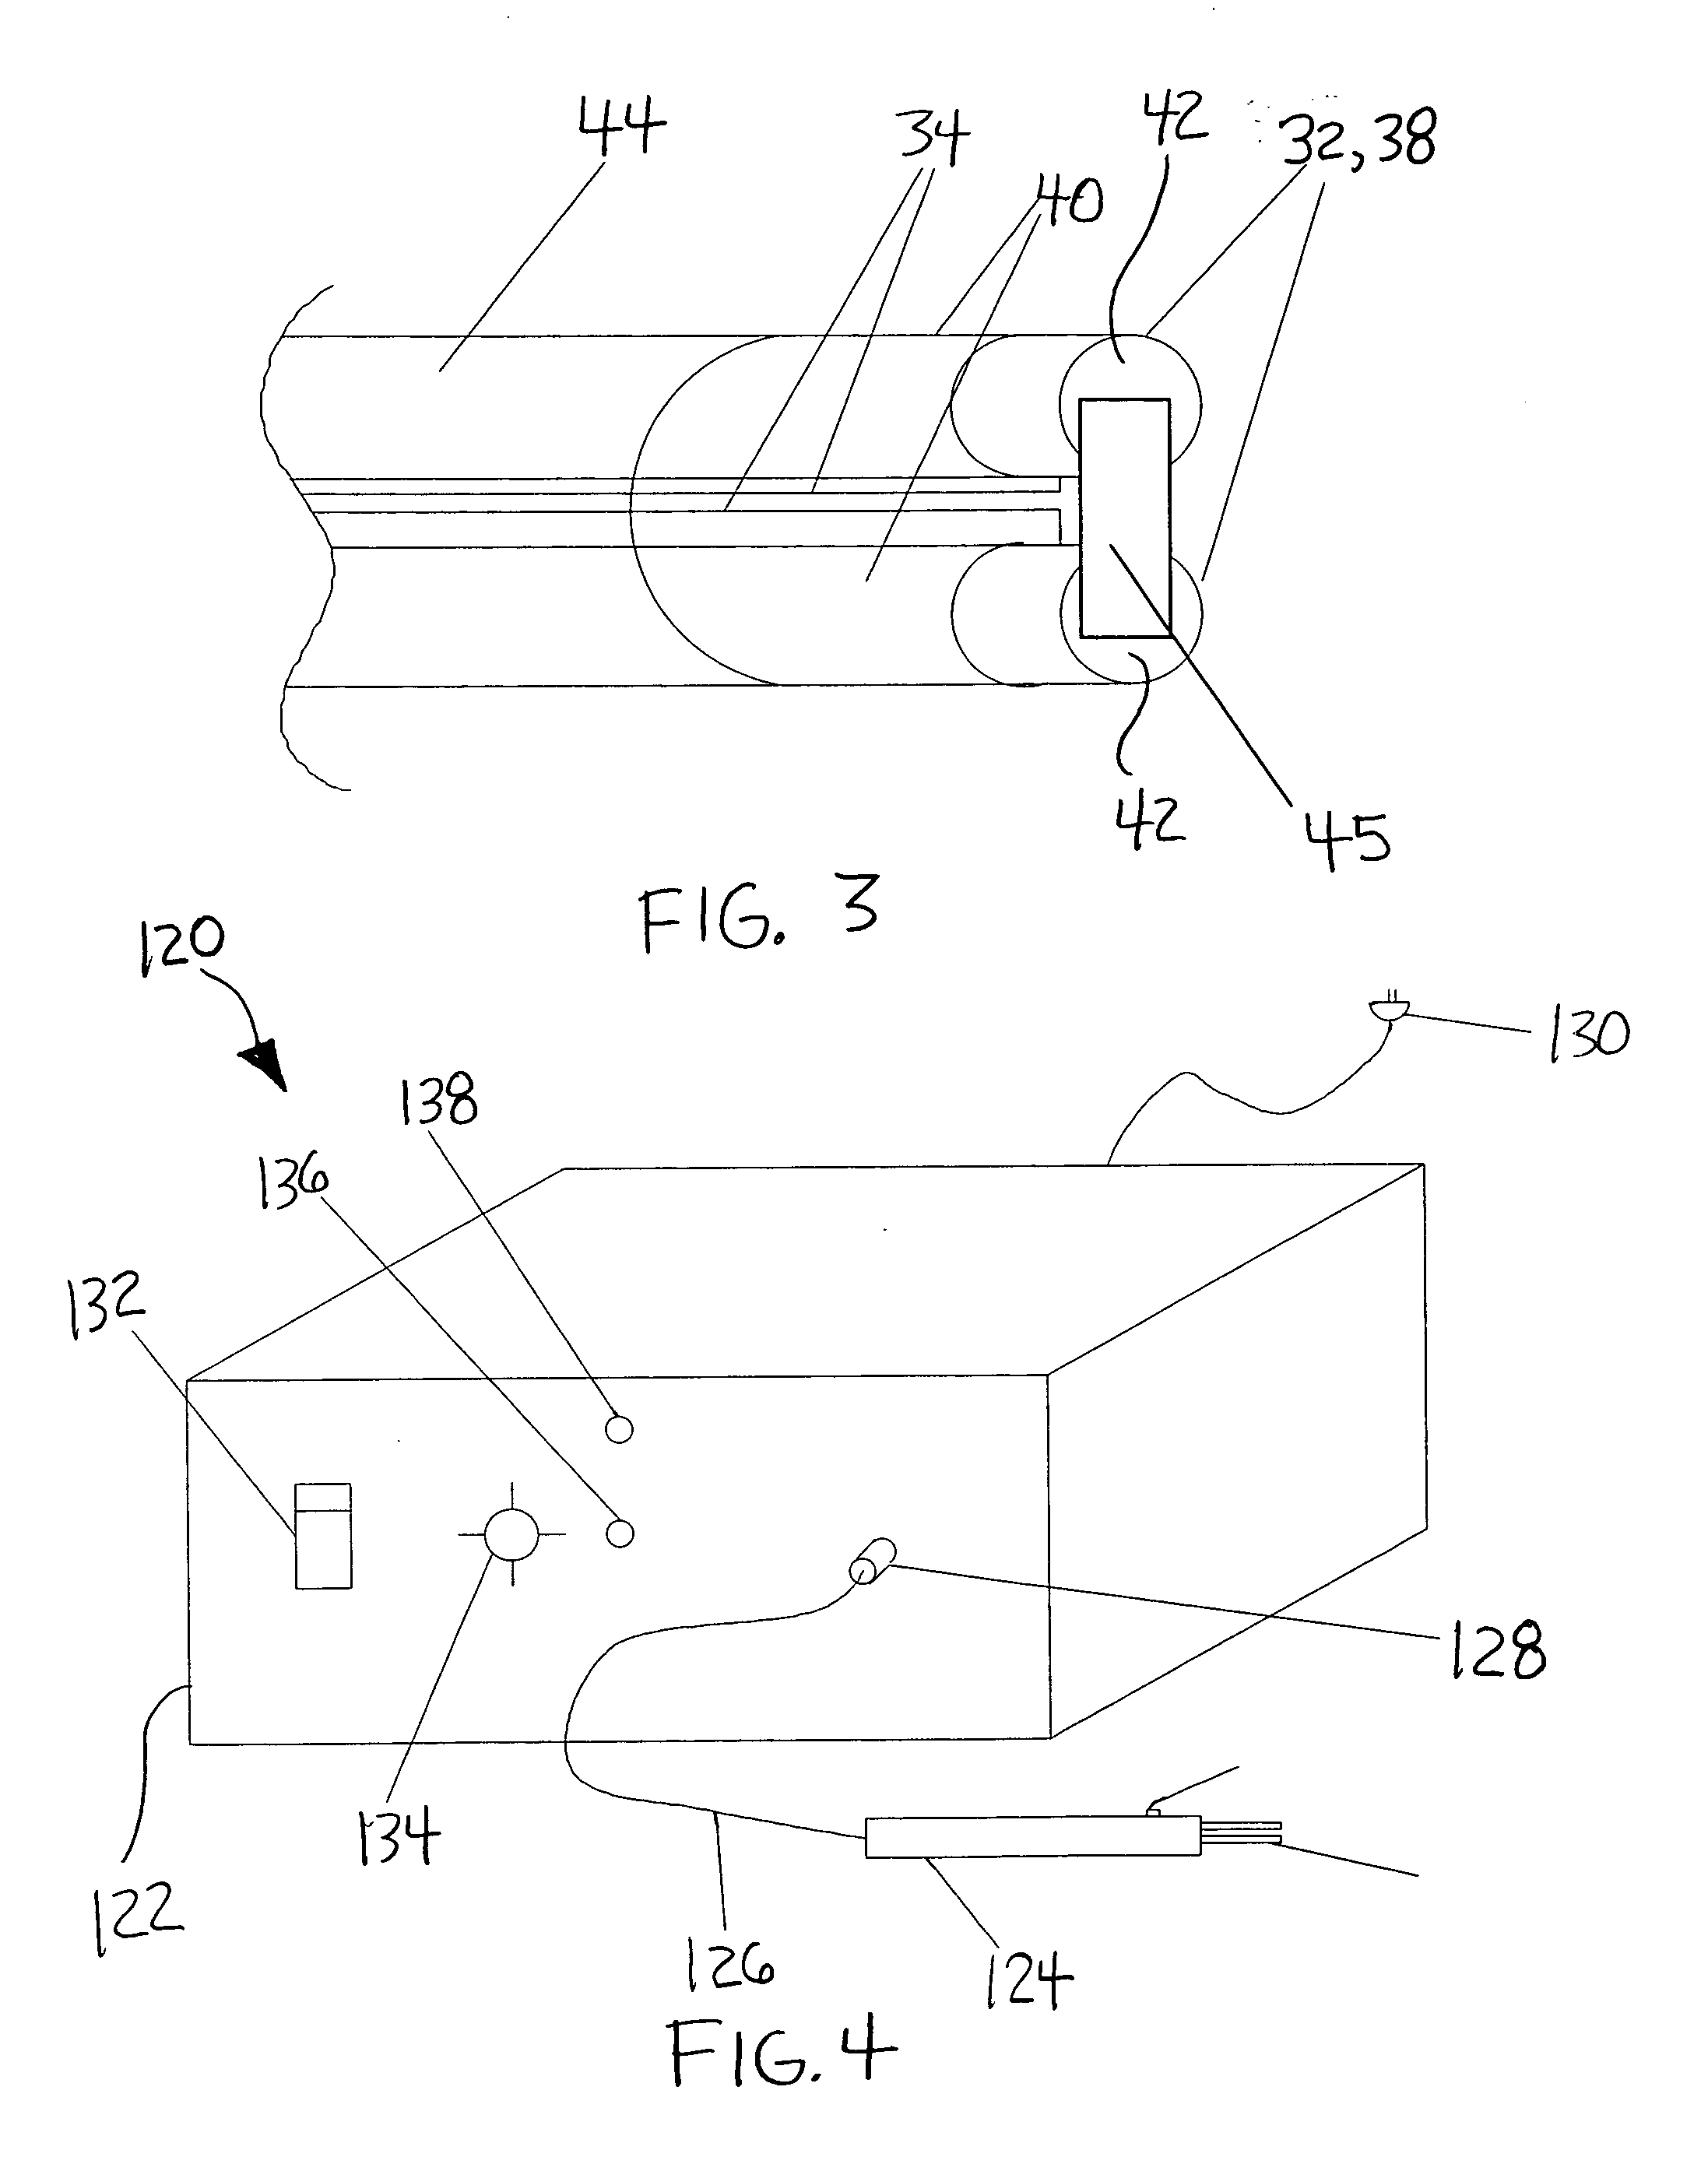 System and device for heating or cooling shape memory surgical devices